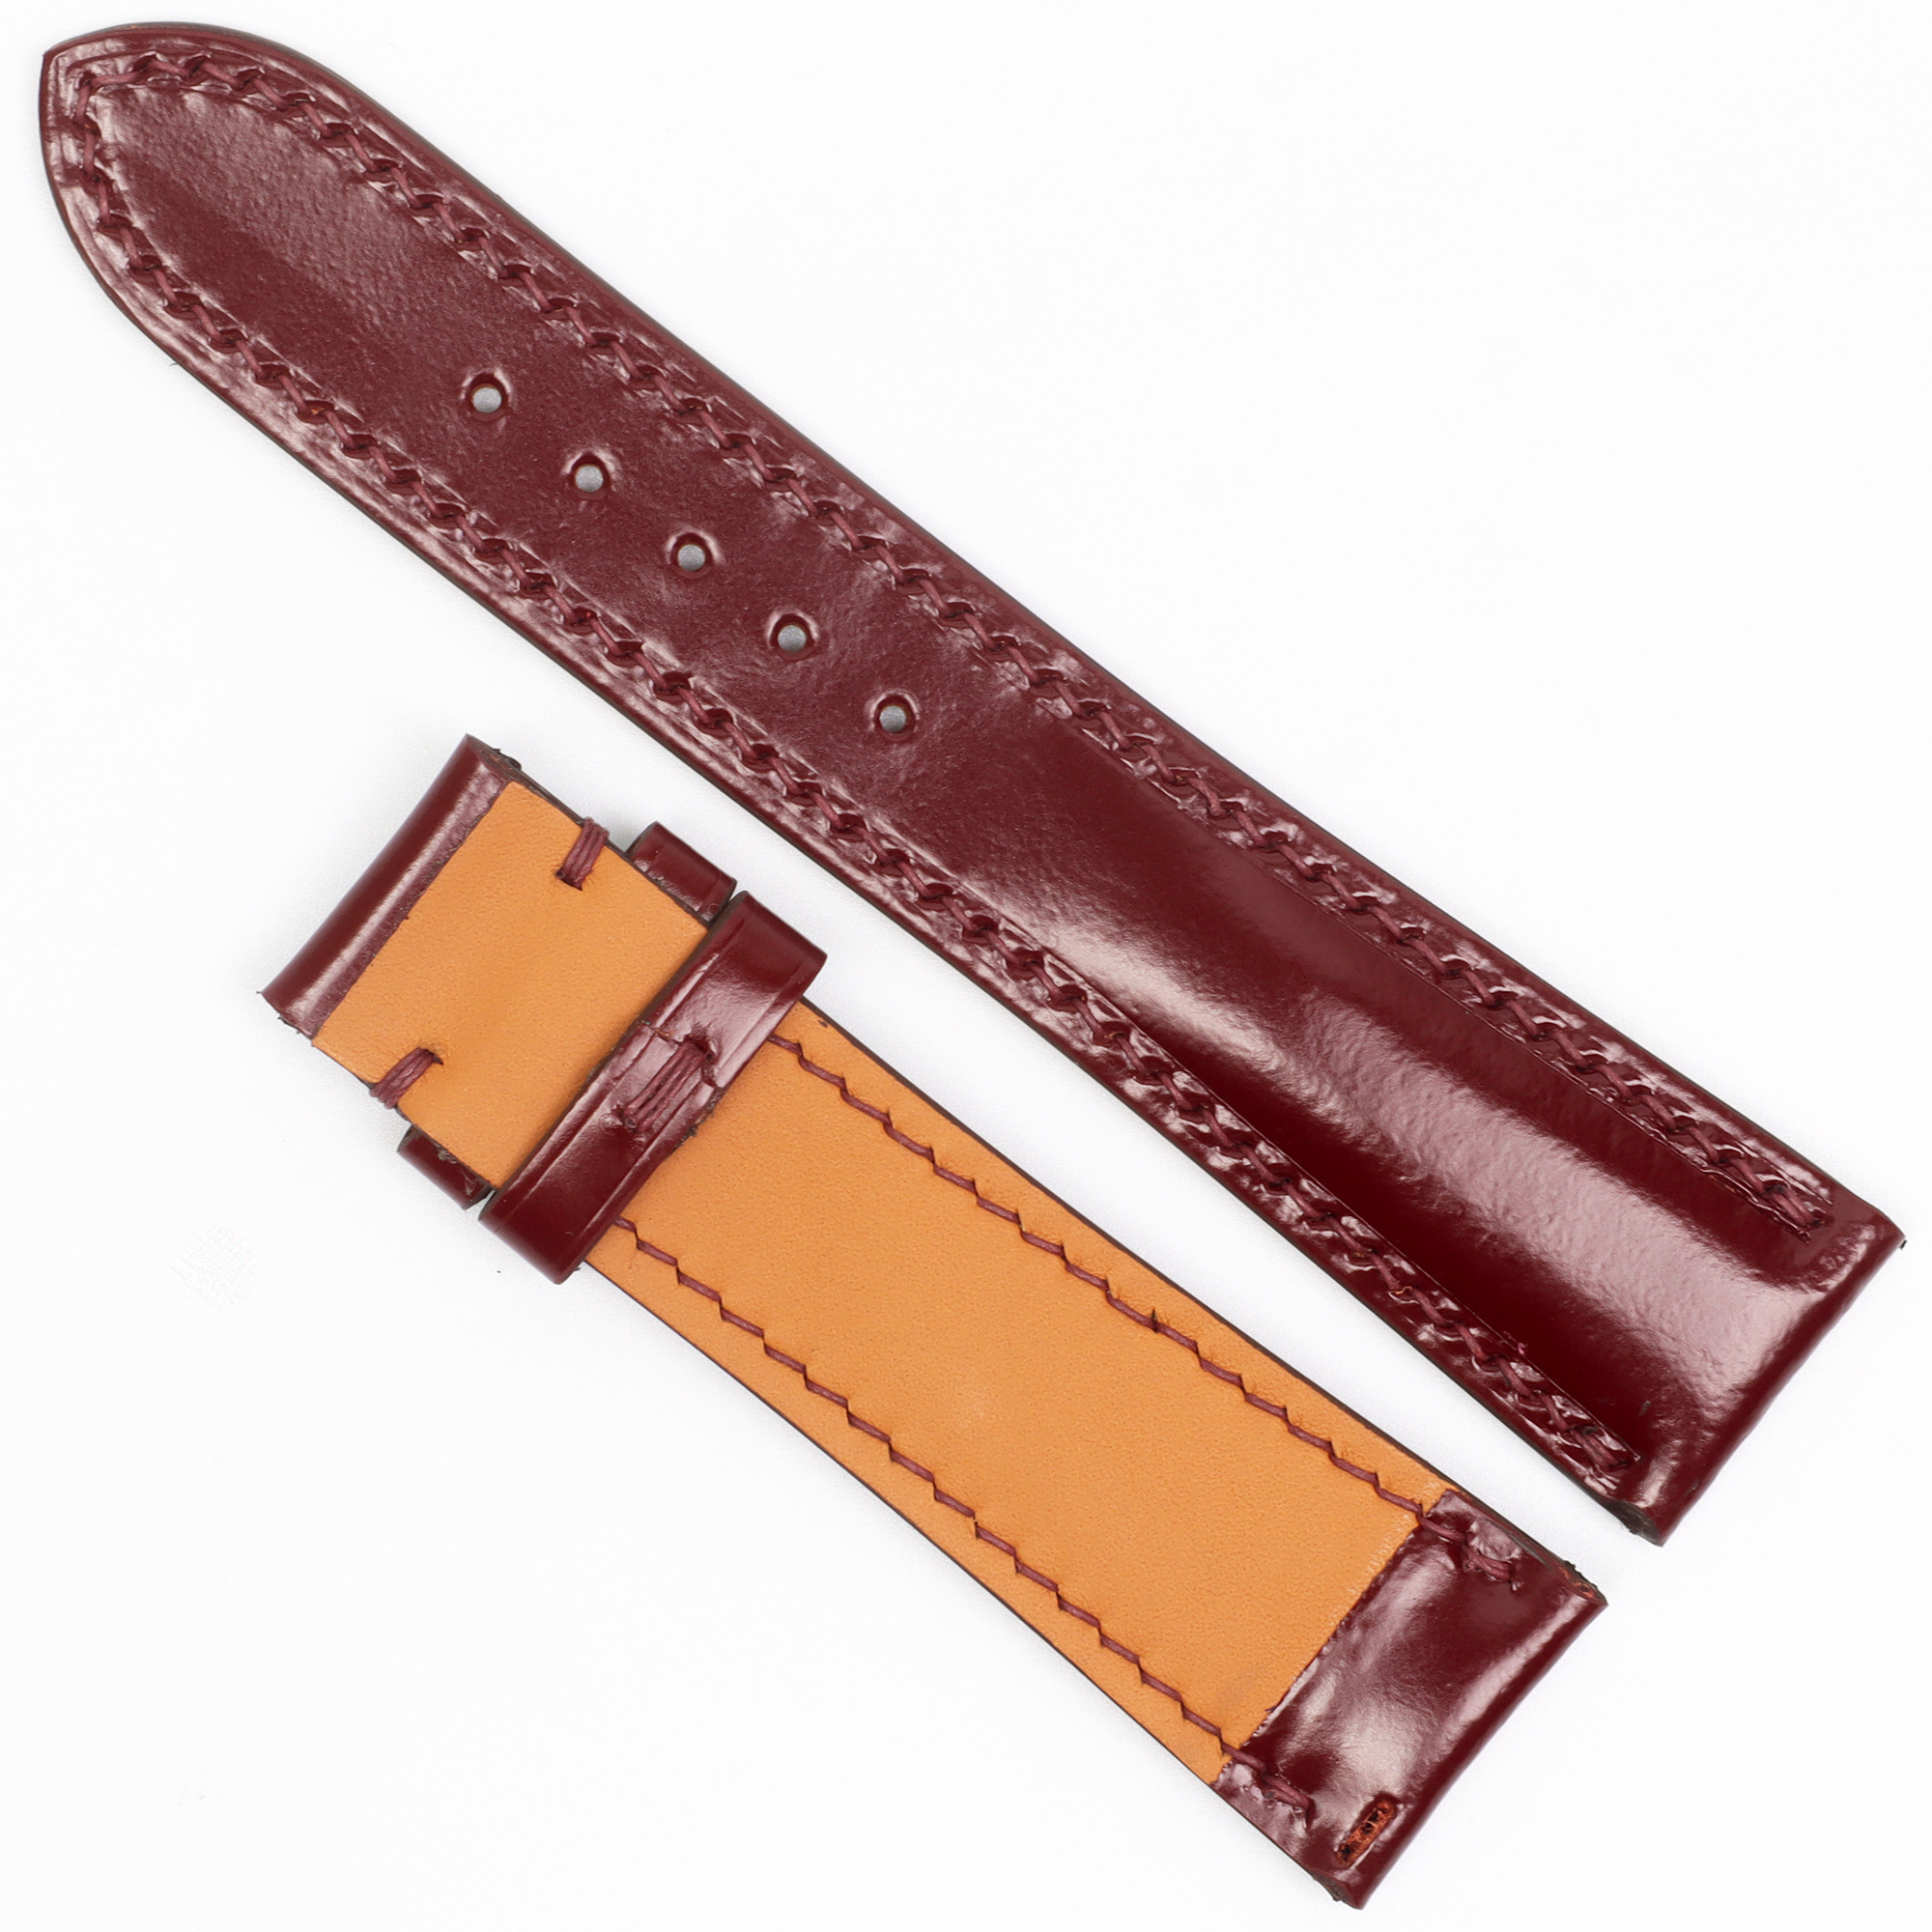 Dark Red Genuine Cowhide Watch straps, Leather Watch Bands Quick Release Pins, Handmade Leather Watch Strap